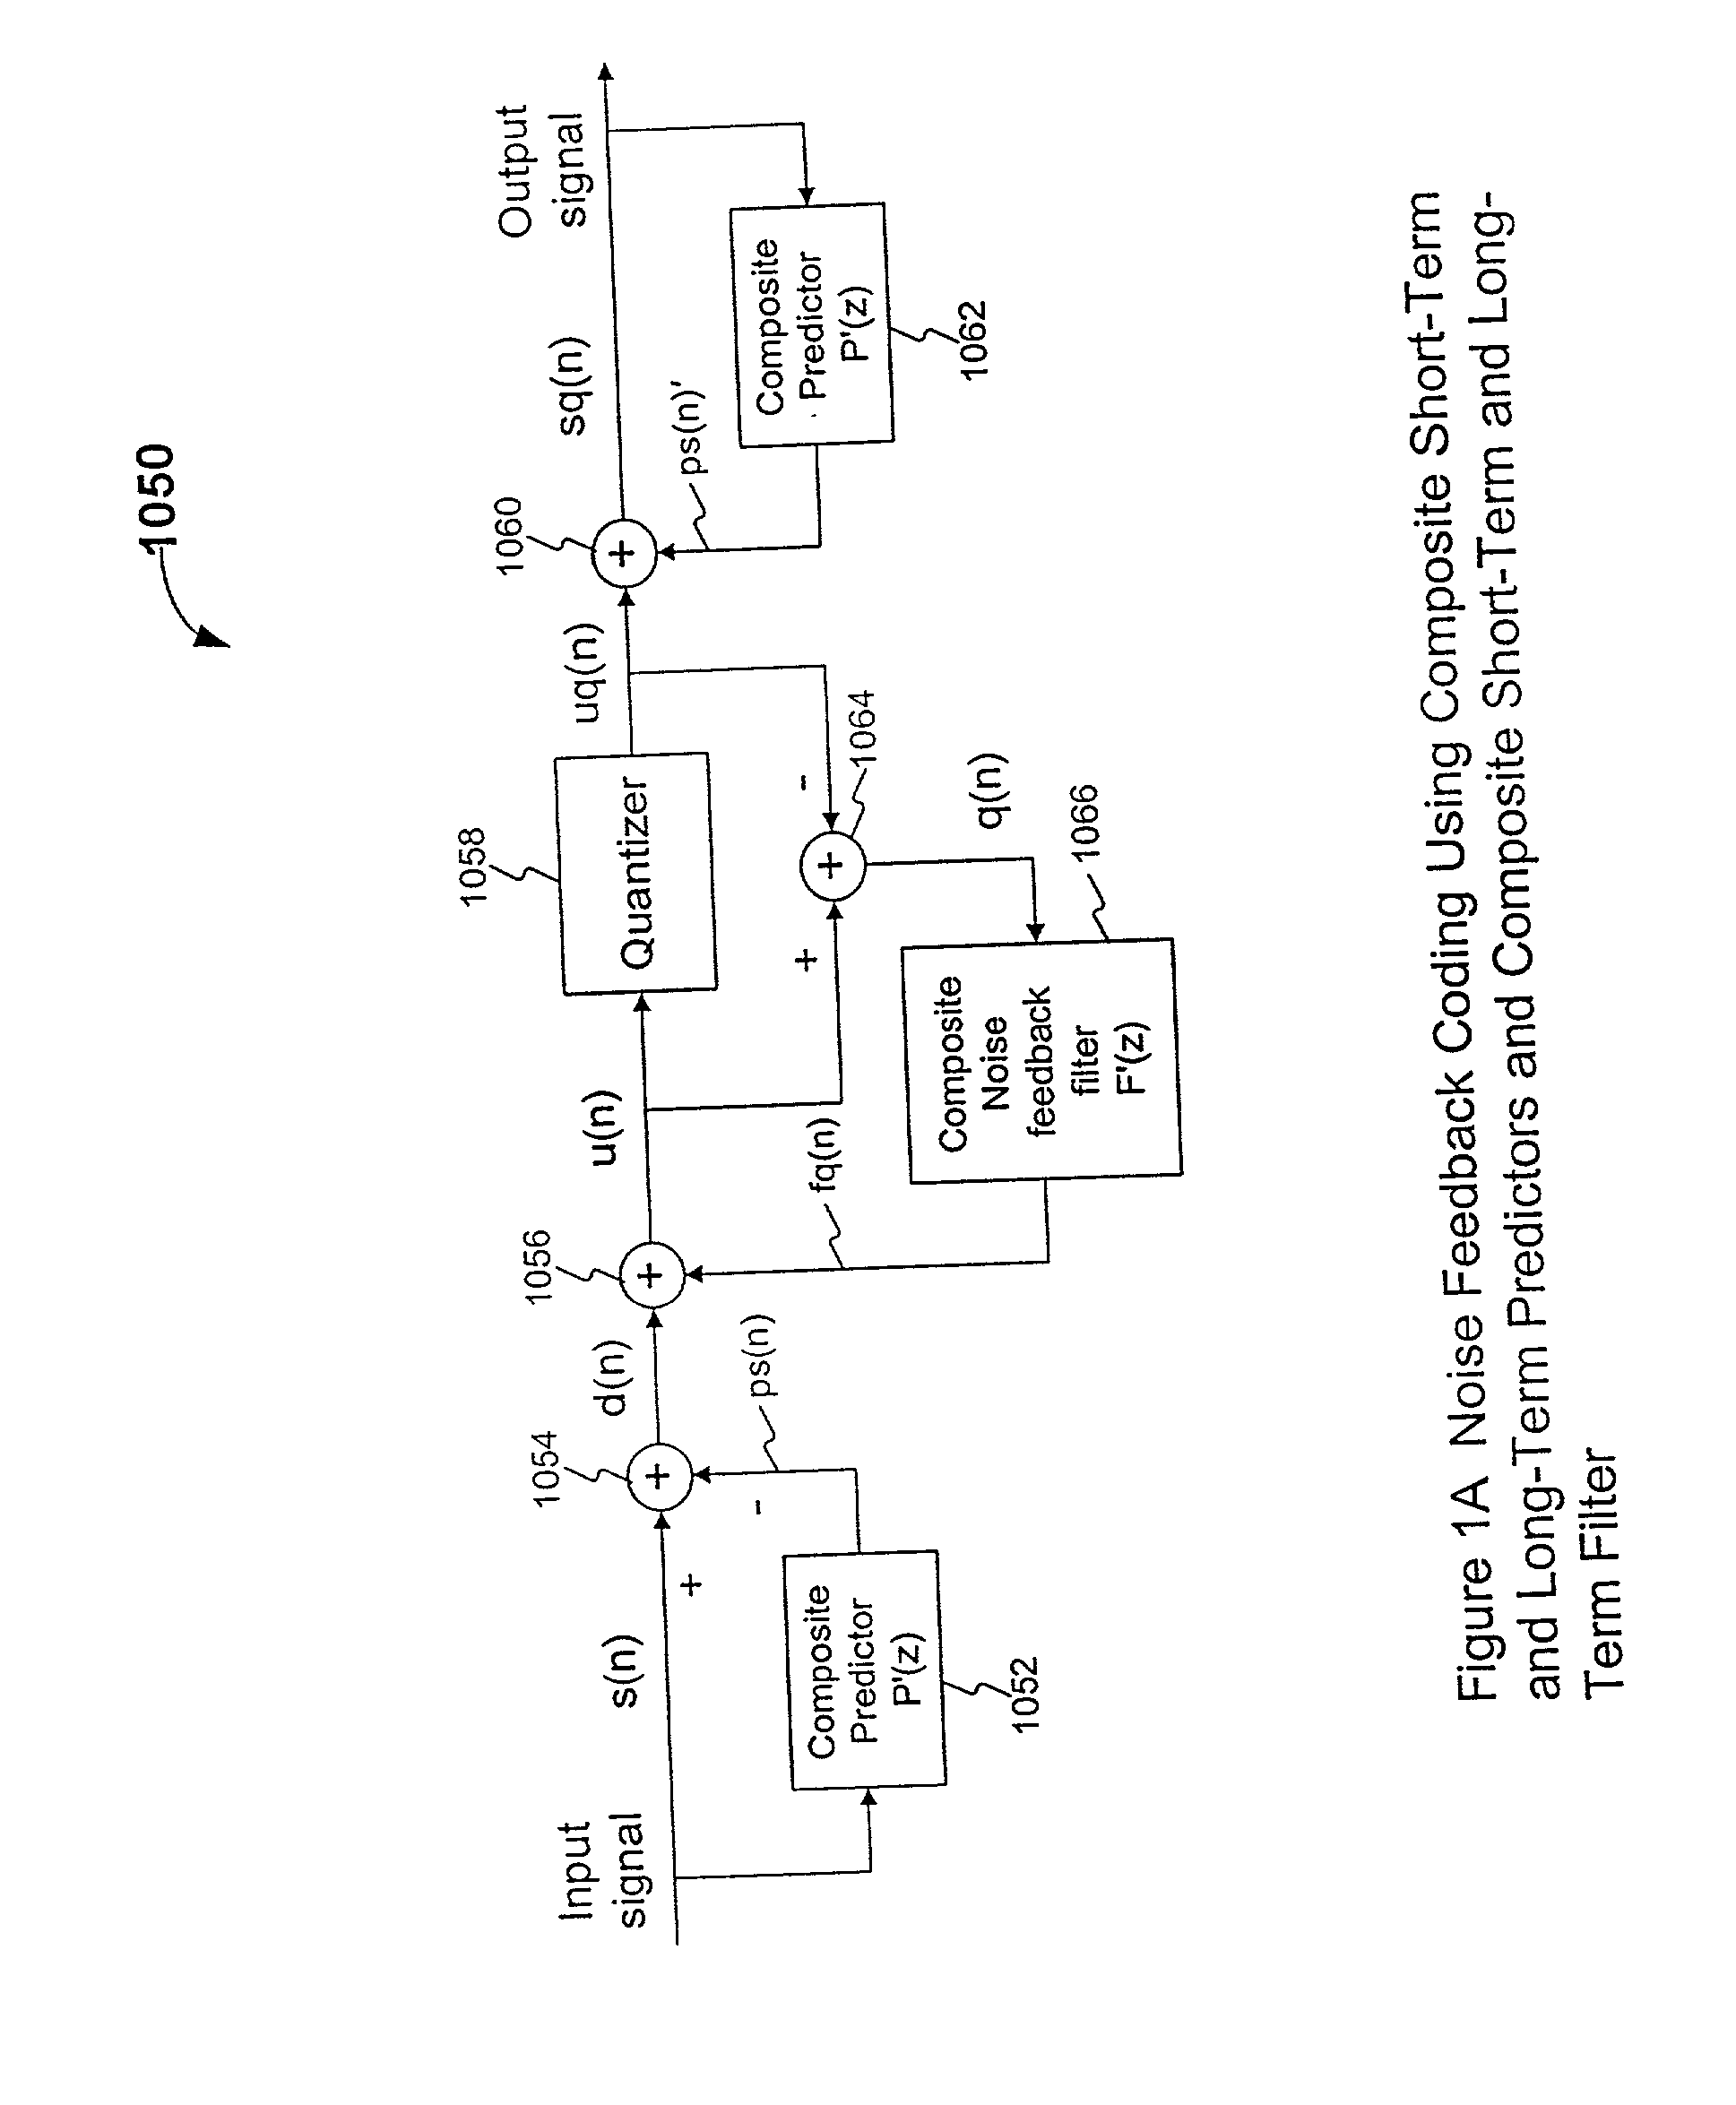 Noise feedback coding method and system for performing general searching of vector quantization codevectors used for coding a speech signal